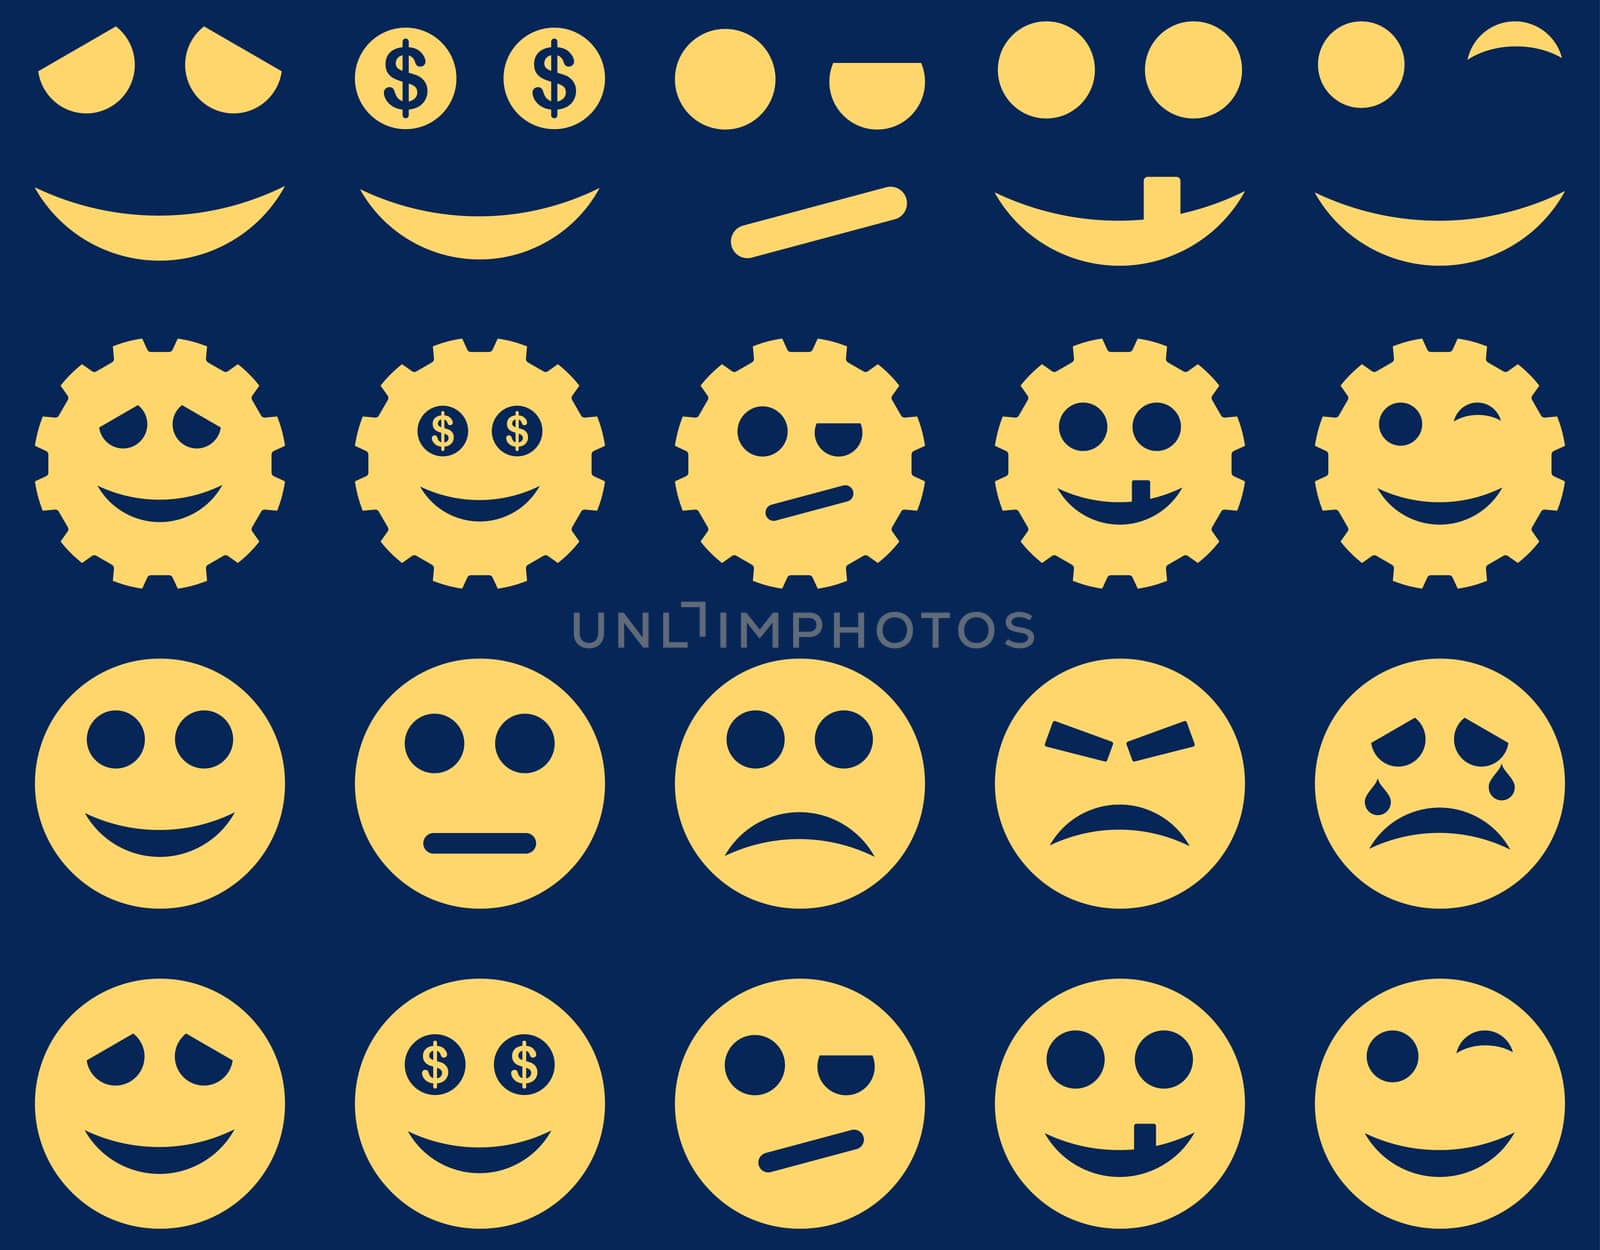 Tools, gears, smiles, emoticons icons. Glyph set style is flat images, yellow symbols, isolated on a blue background.